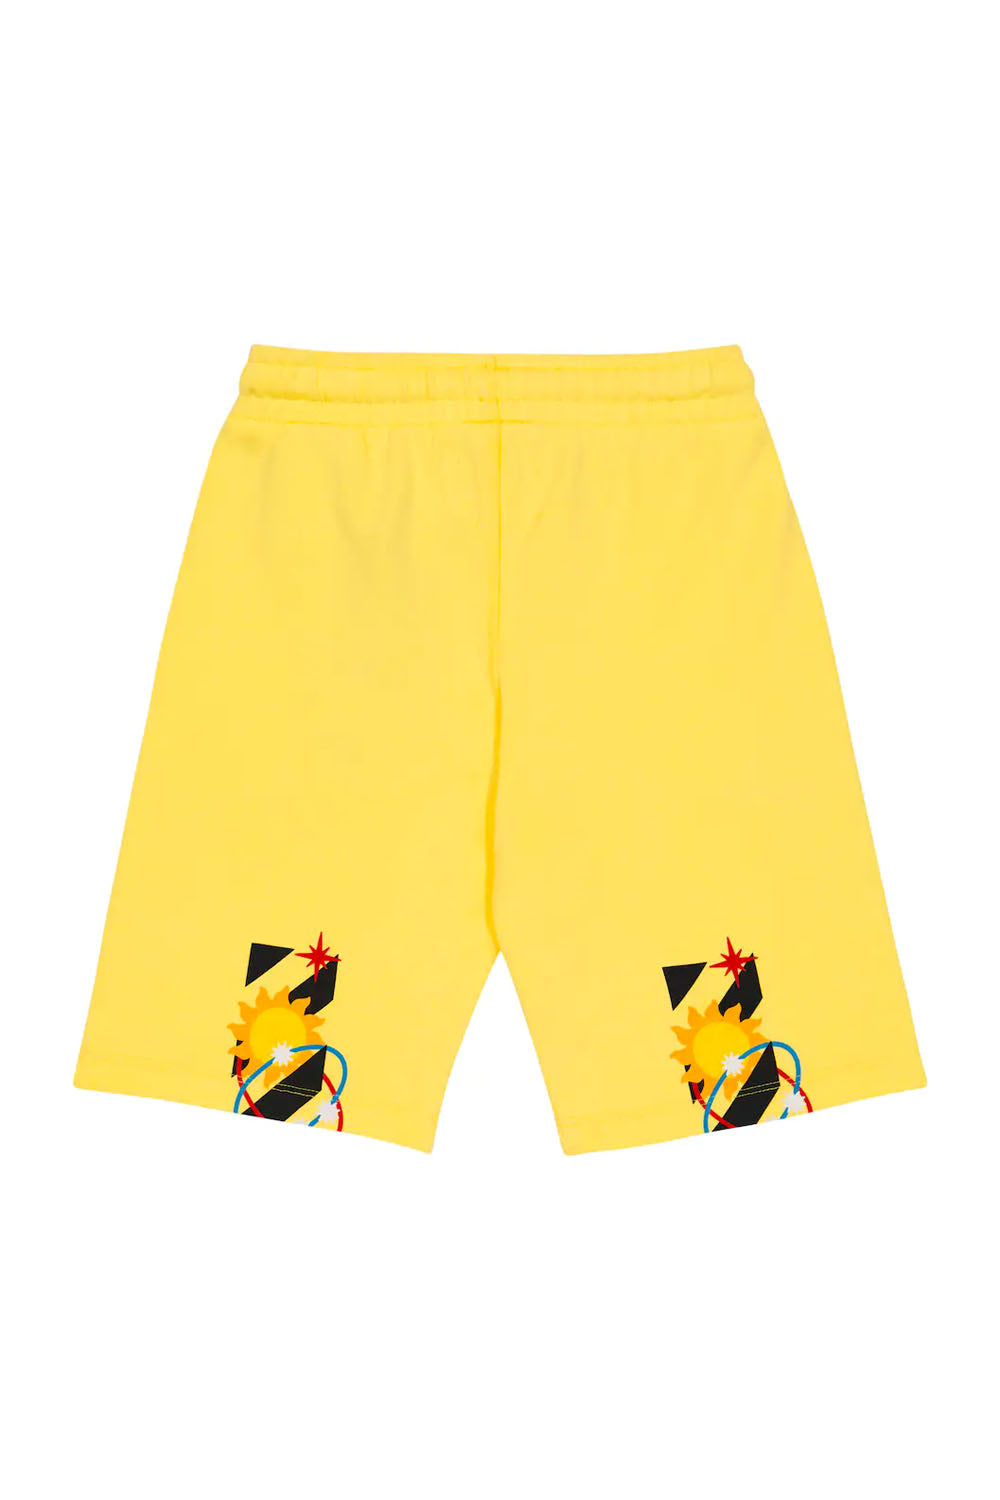 Off Planets Sweat Short for Boys - Maison7